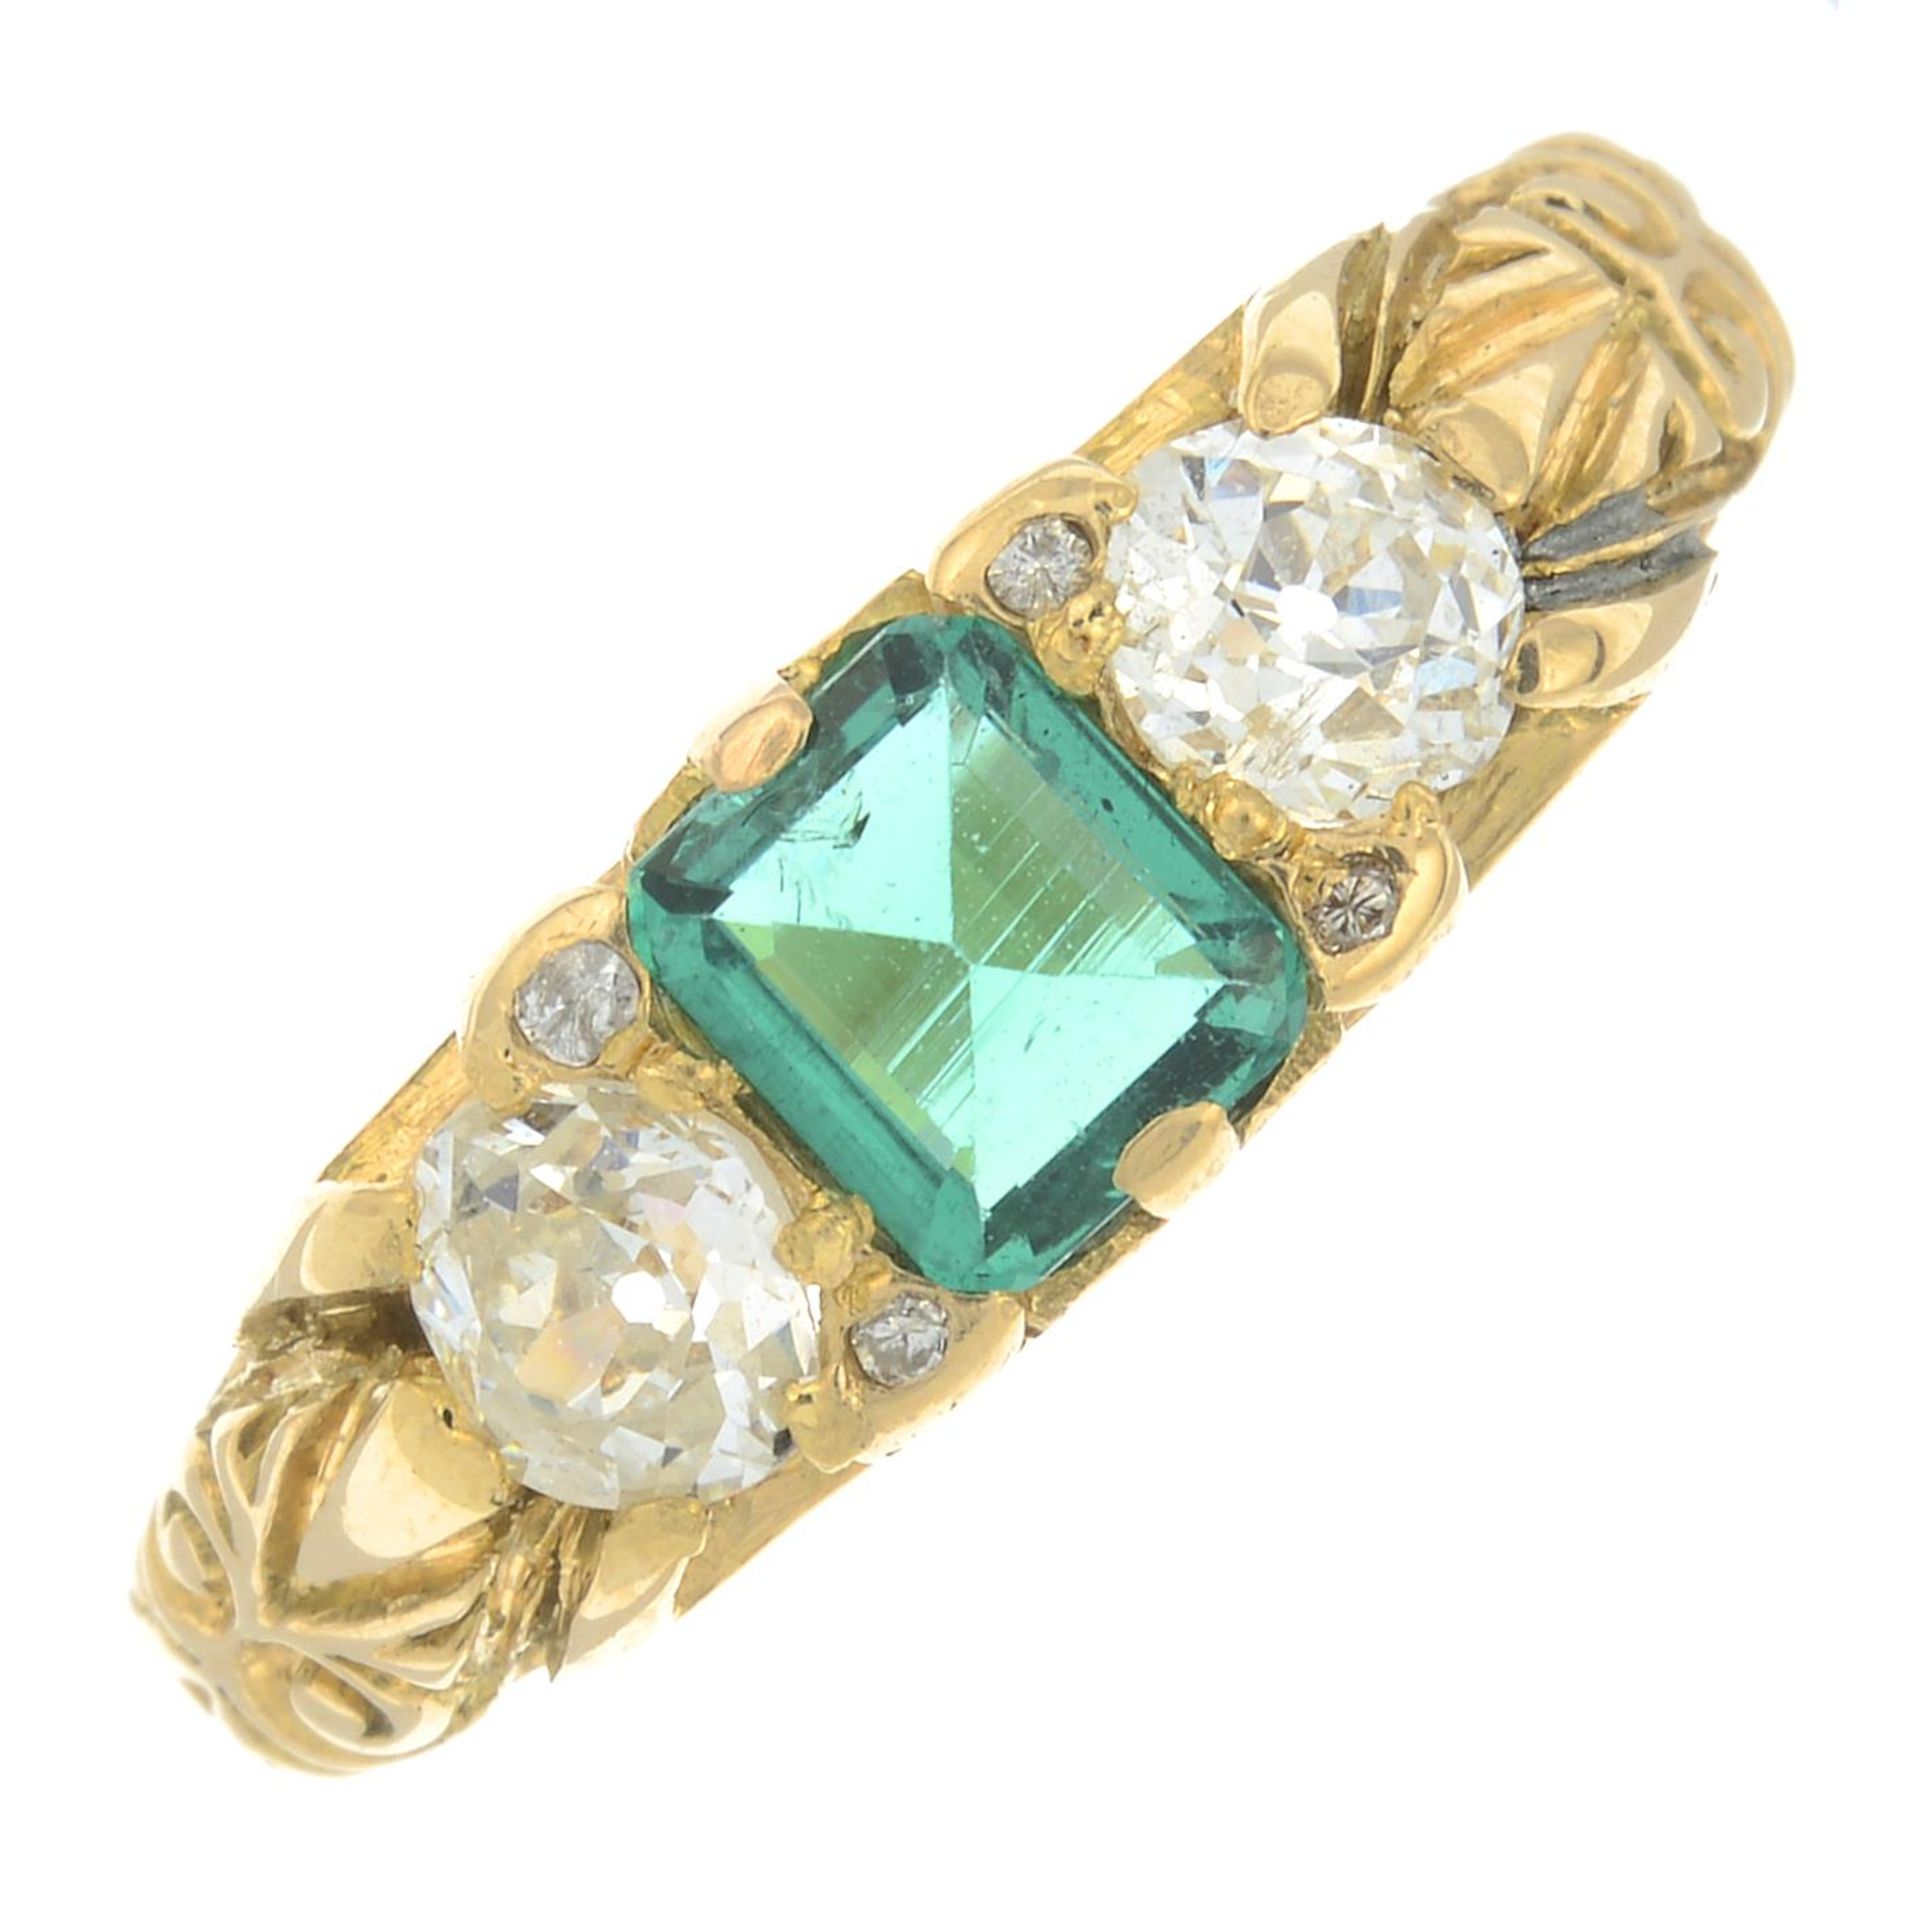 An old-cut diamond and emerald three-stone ring,